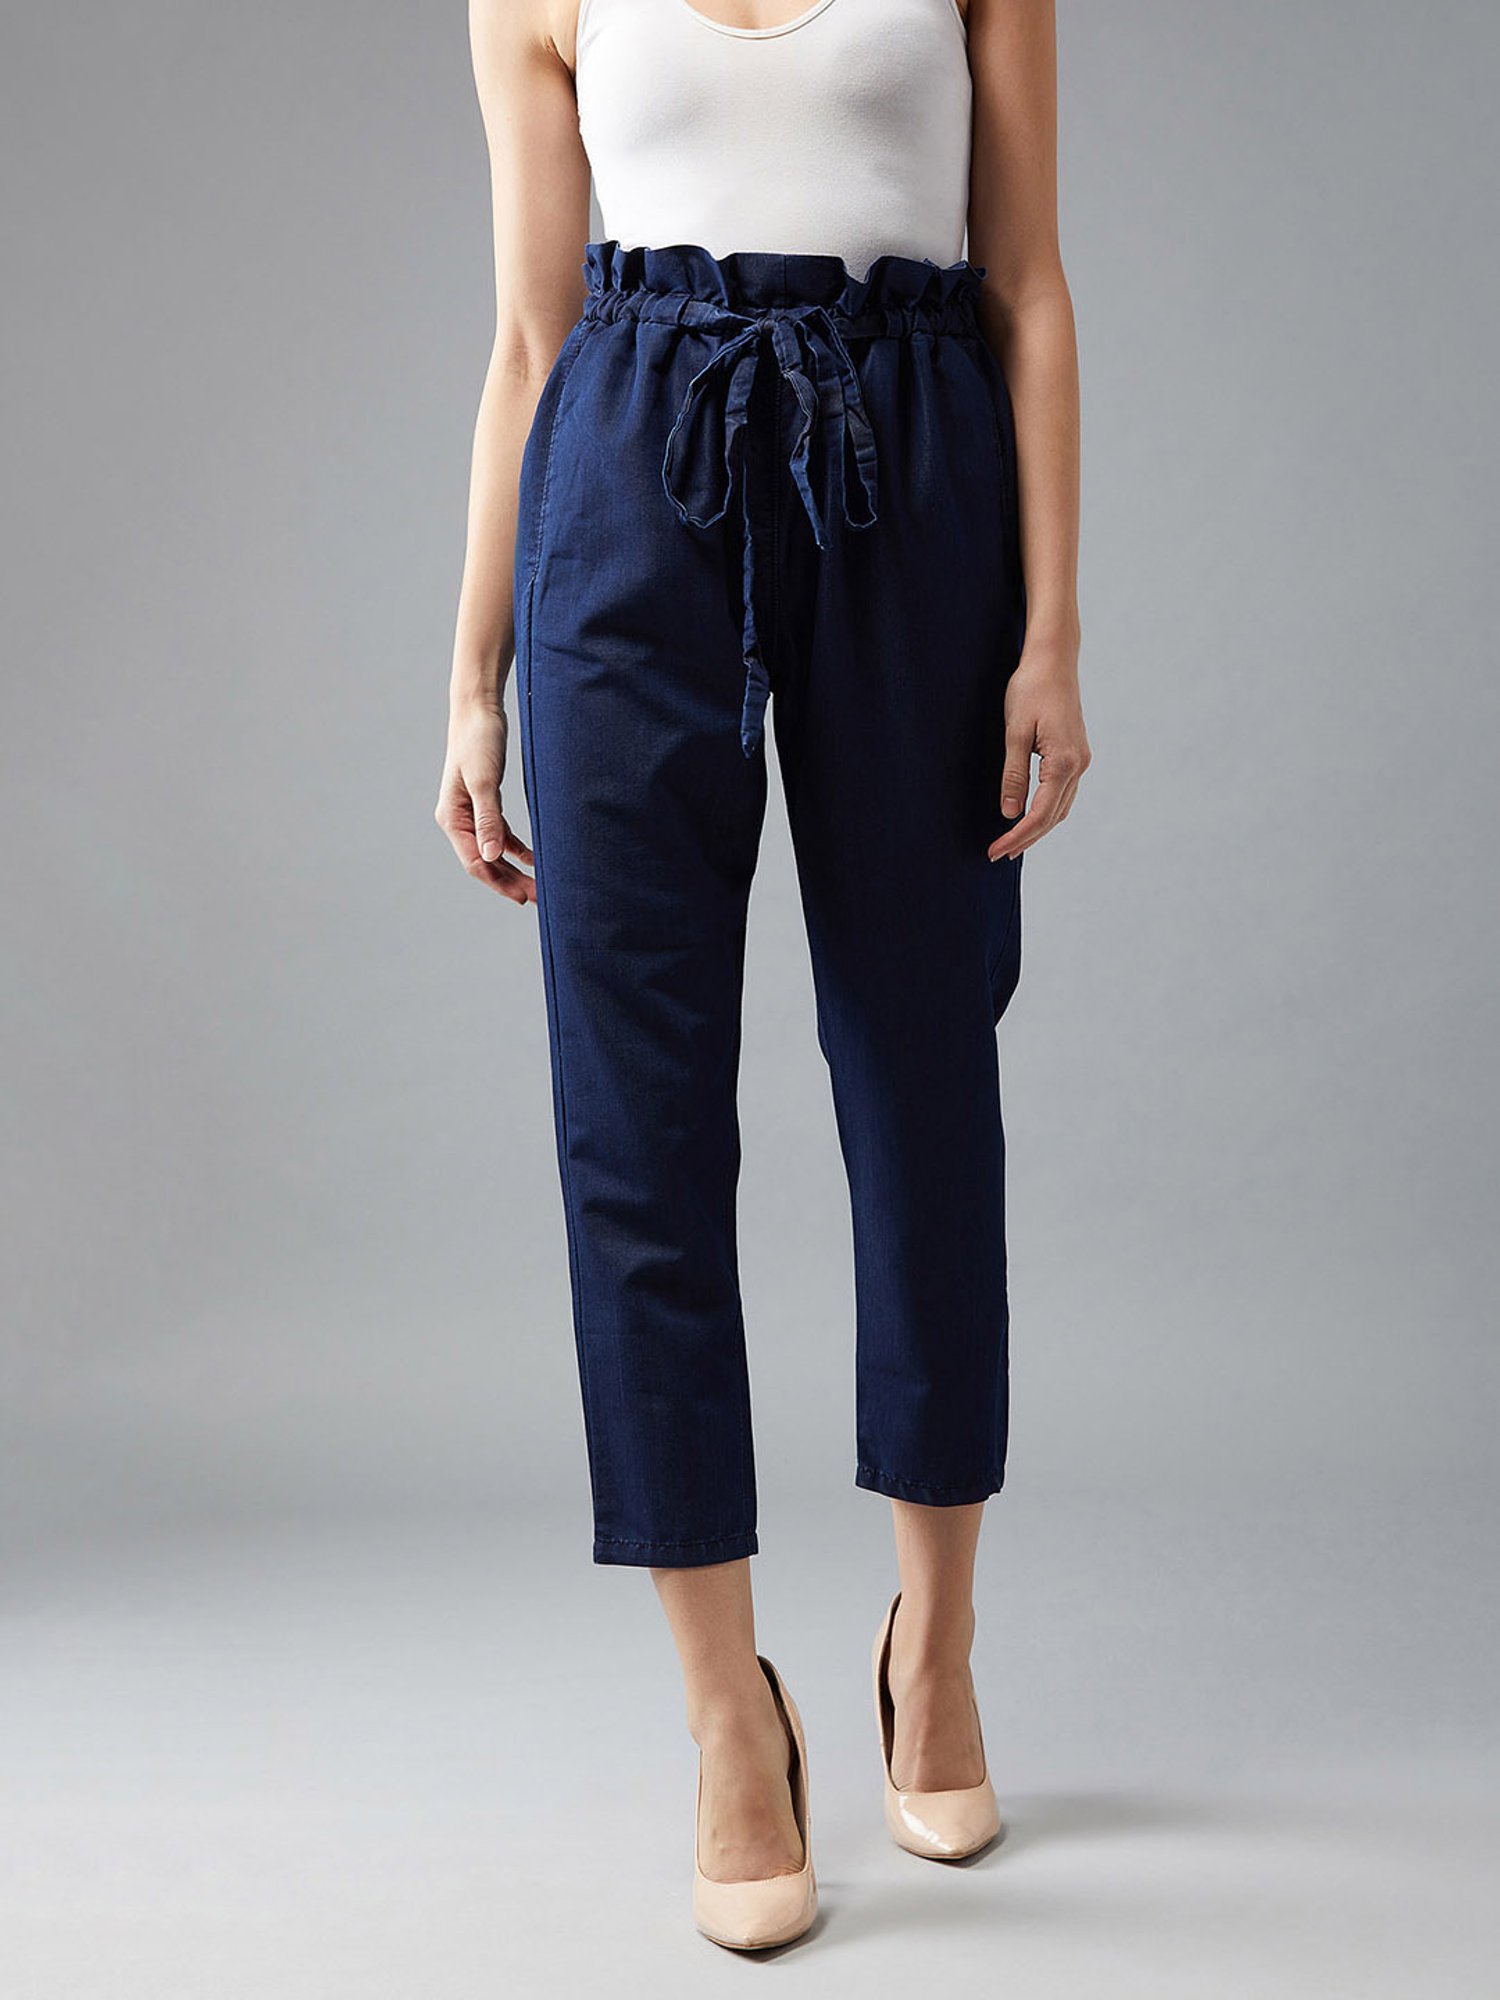 Navy High Rise Tie Waist Paper Bag Trousers  New Look